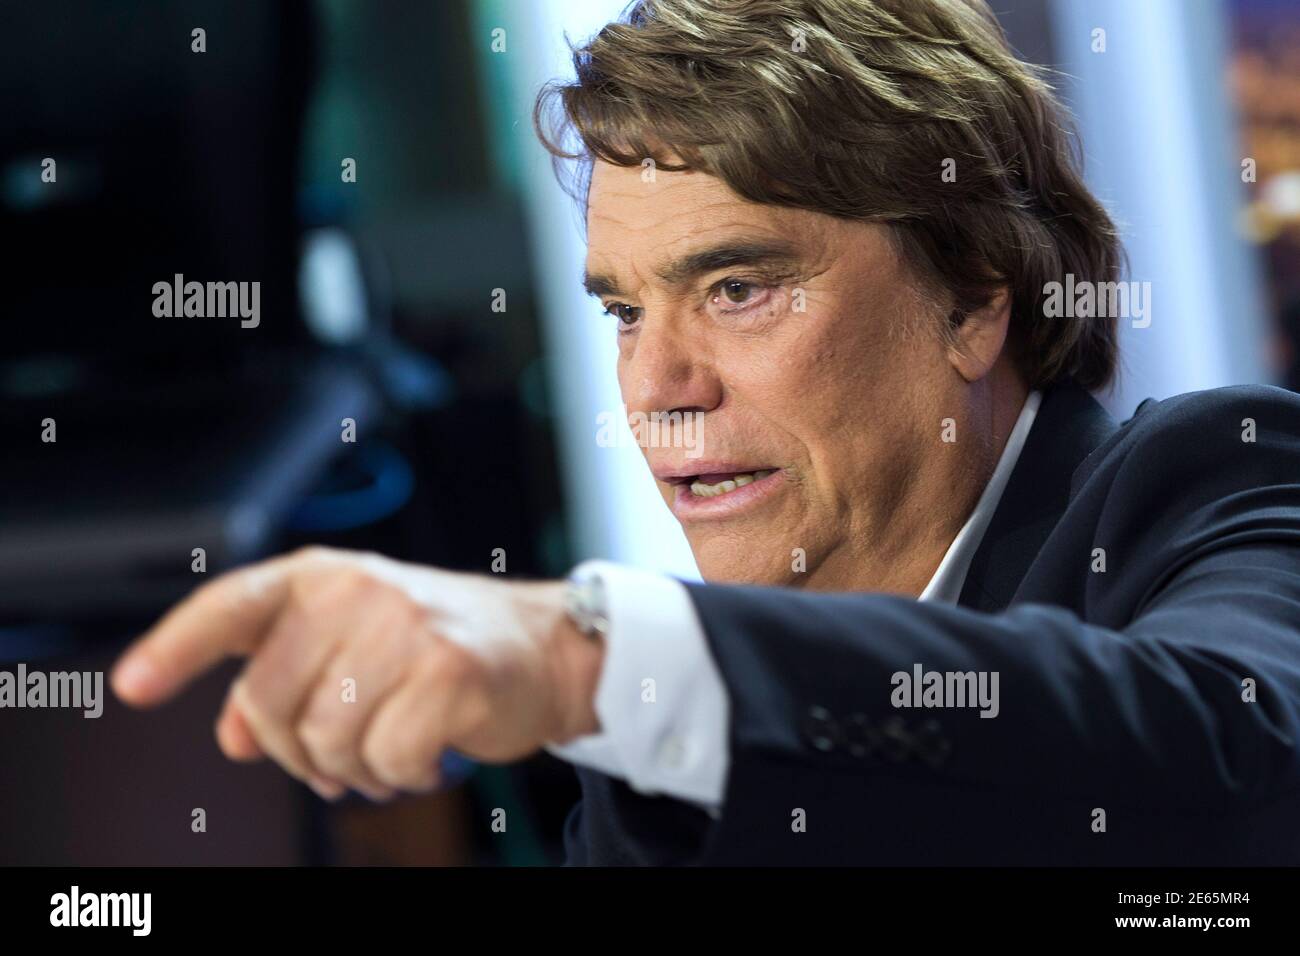 French businessman Bernard Tapie gestures as he attends the French channel France  2 news evening broadcast in Paris July 1, 2013. Tapie was put under formal  investigation on suspicion of fraud on